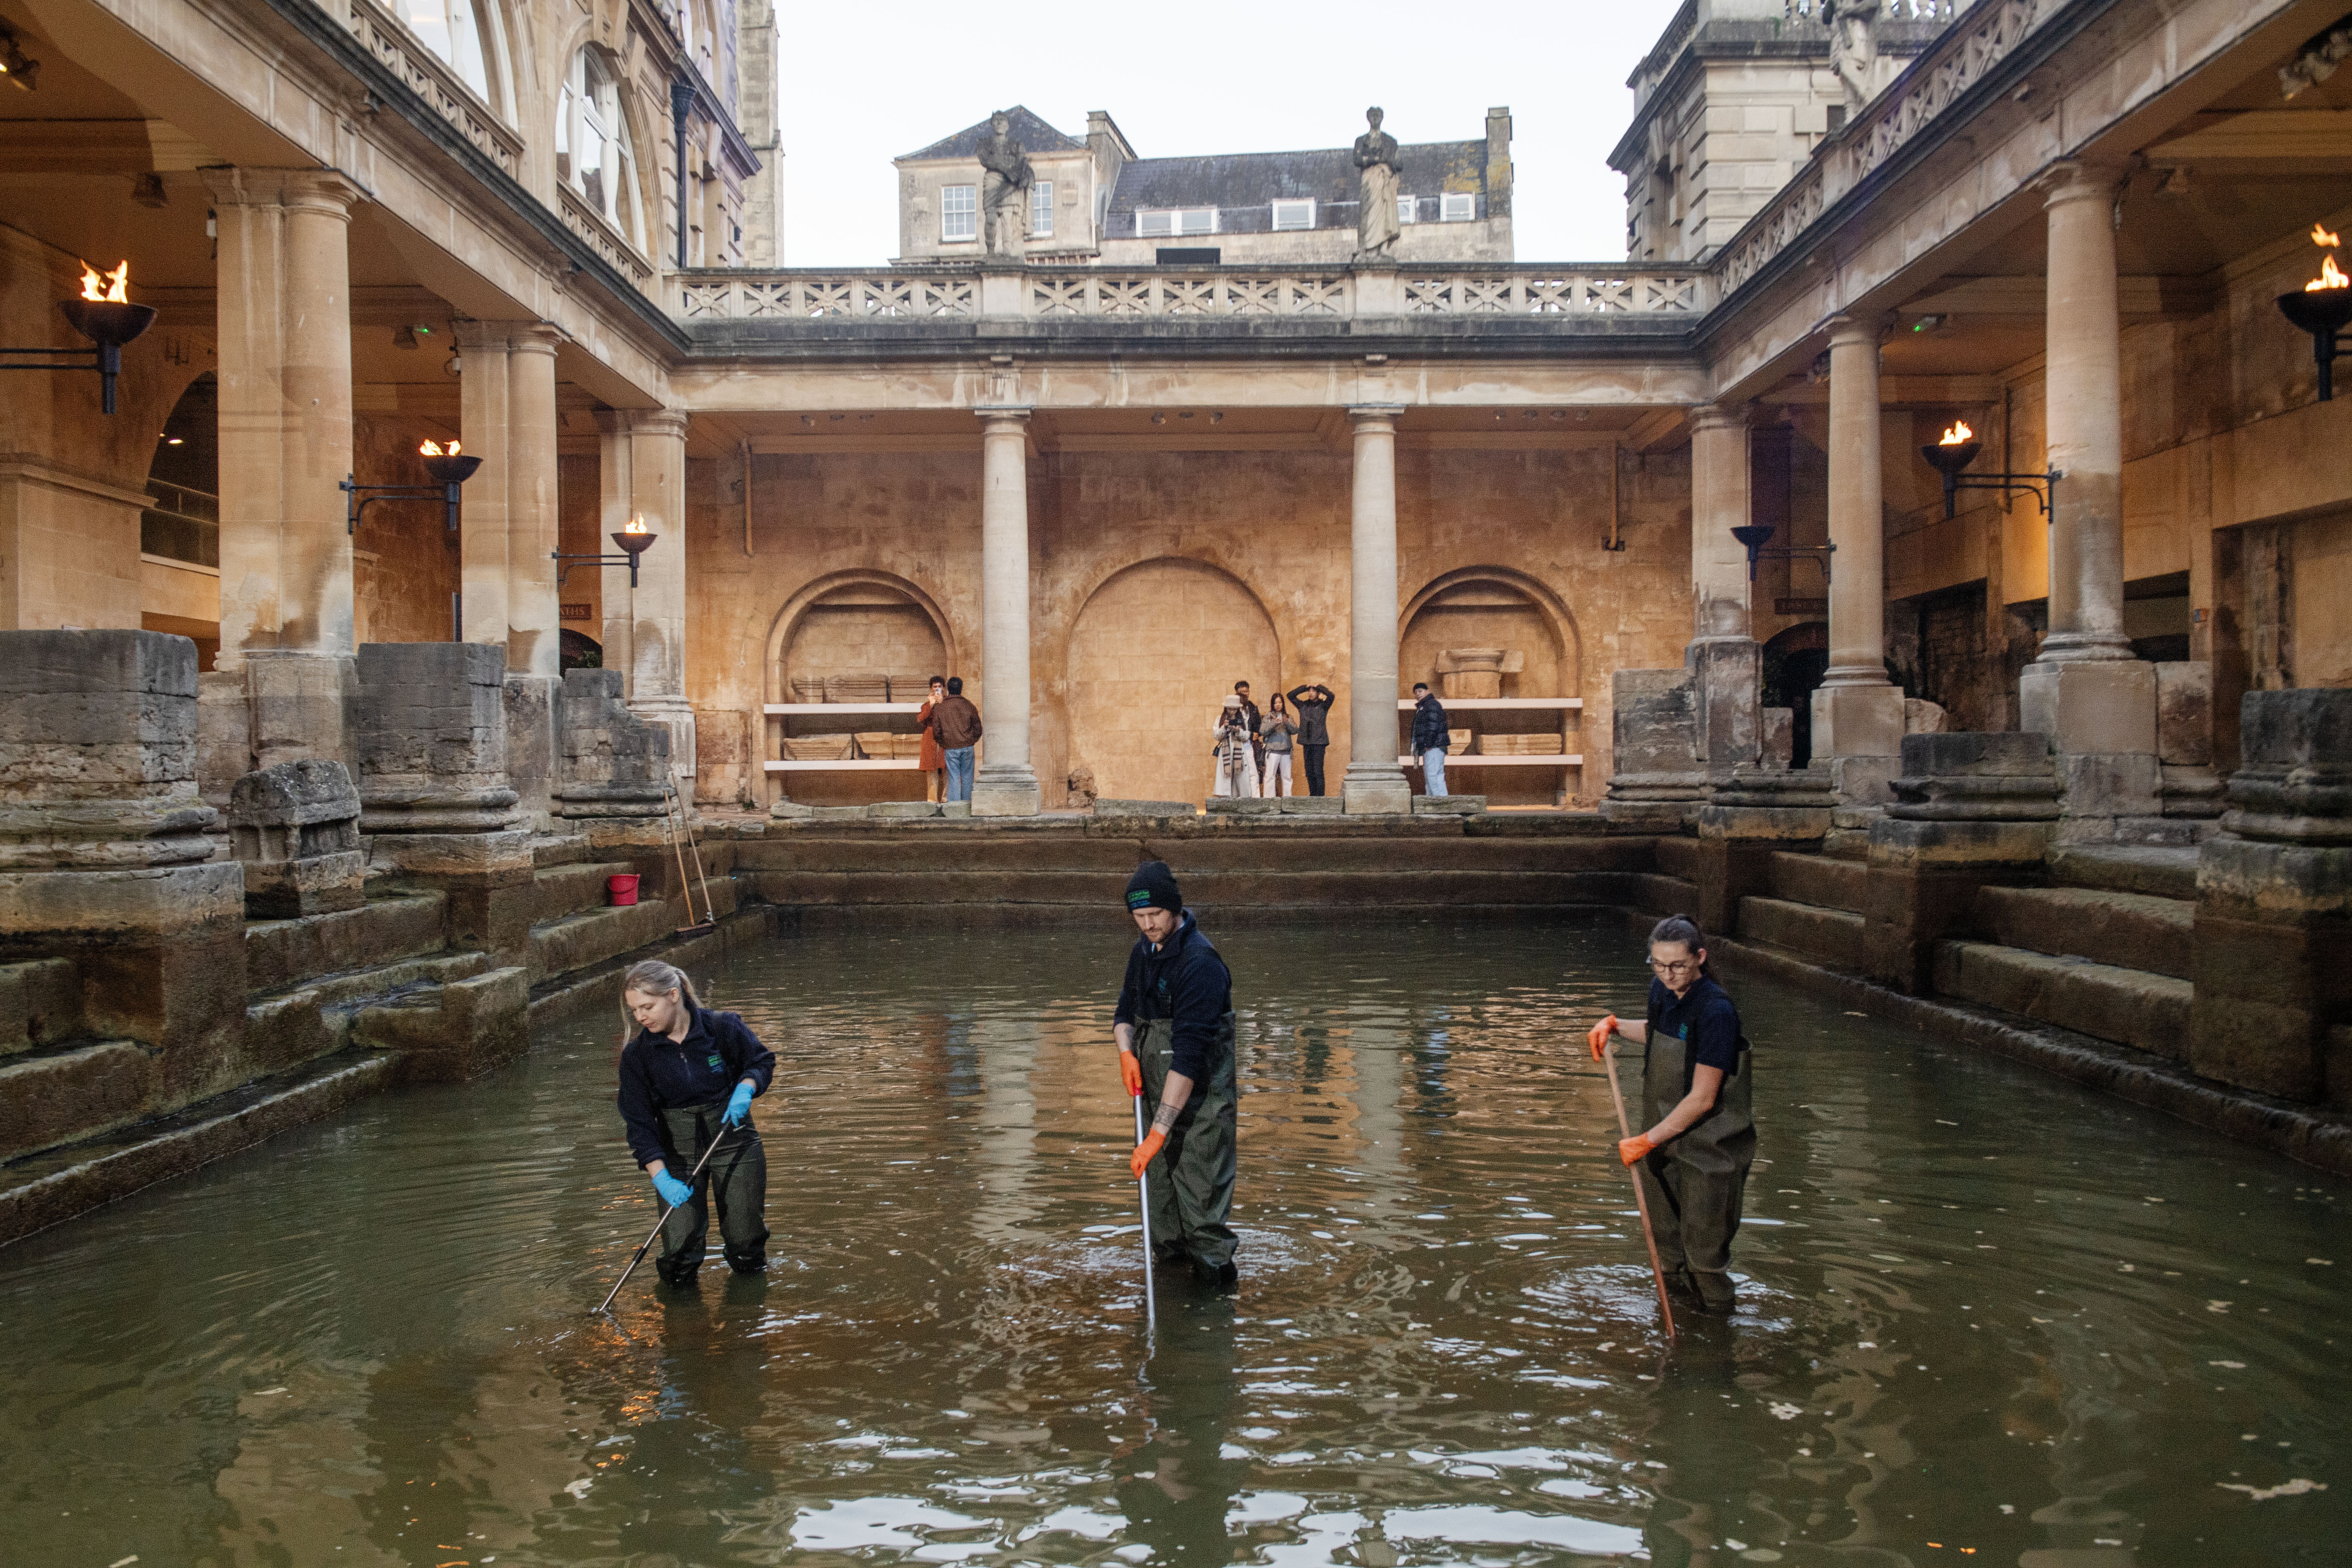 Image: Three members of the Operations team are standing in the Great Bath with brushes